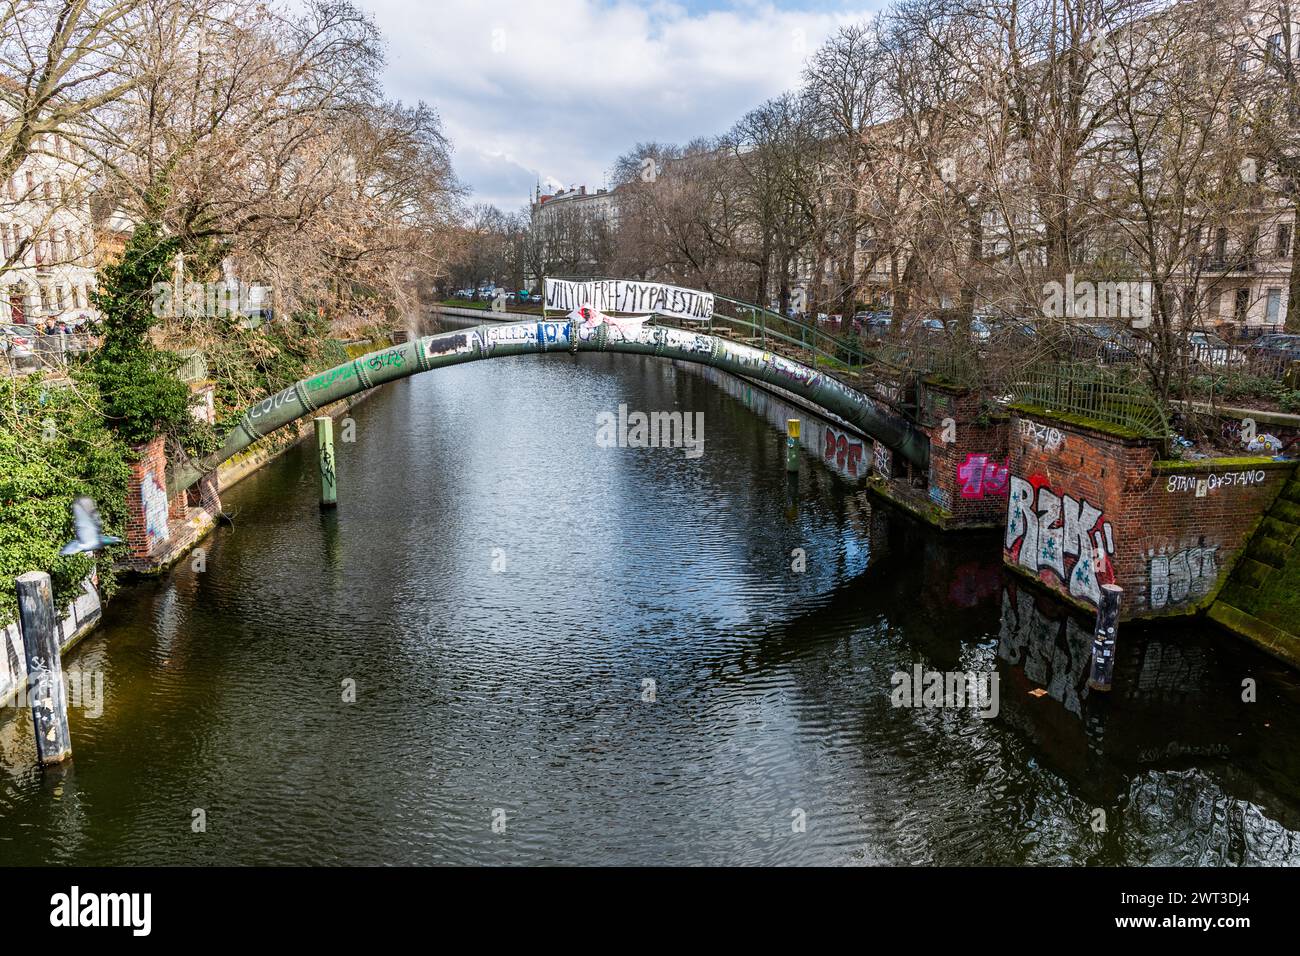 Pipeline across the Landwehr Canal with a banner 'Will vou free my Palestine?' Berlin, Germany Stock Photo